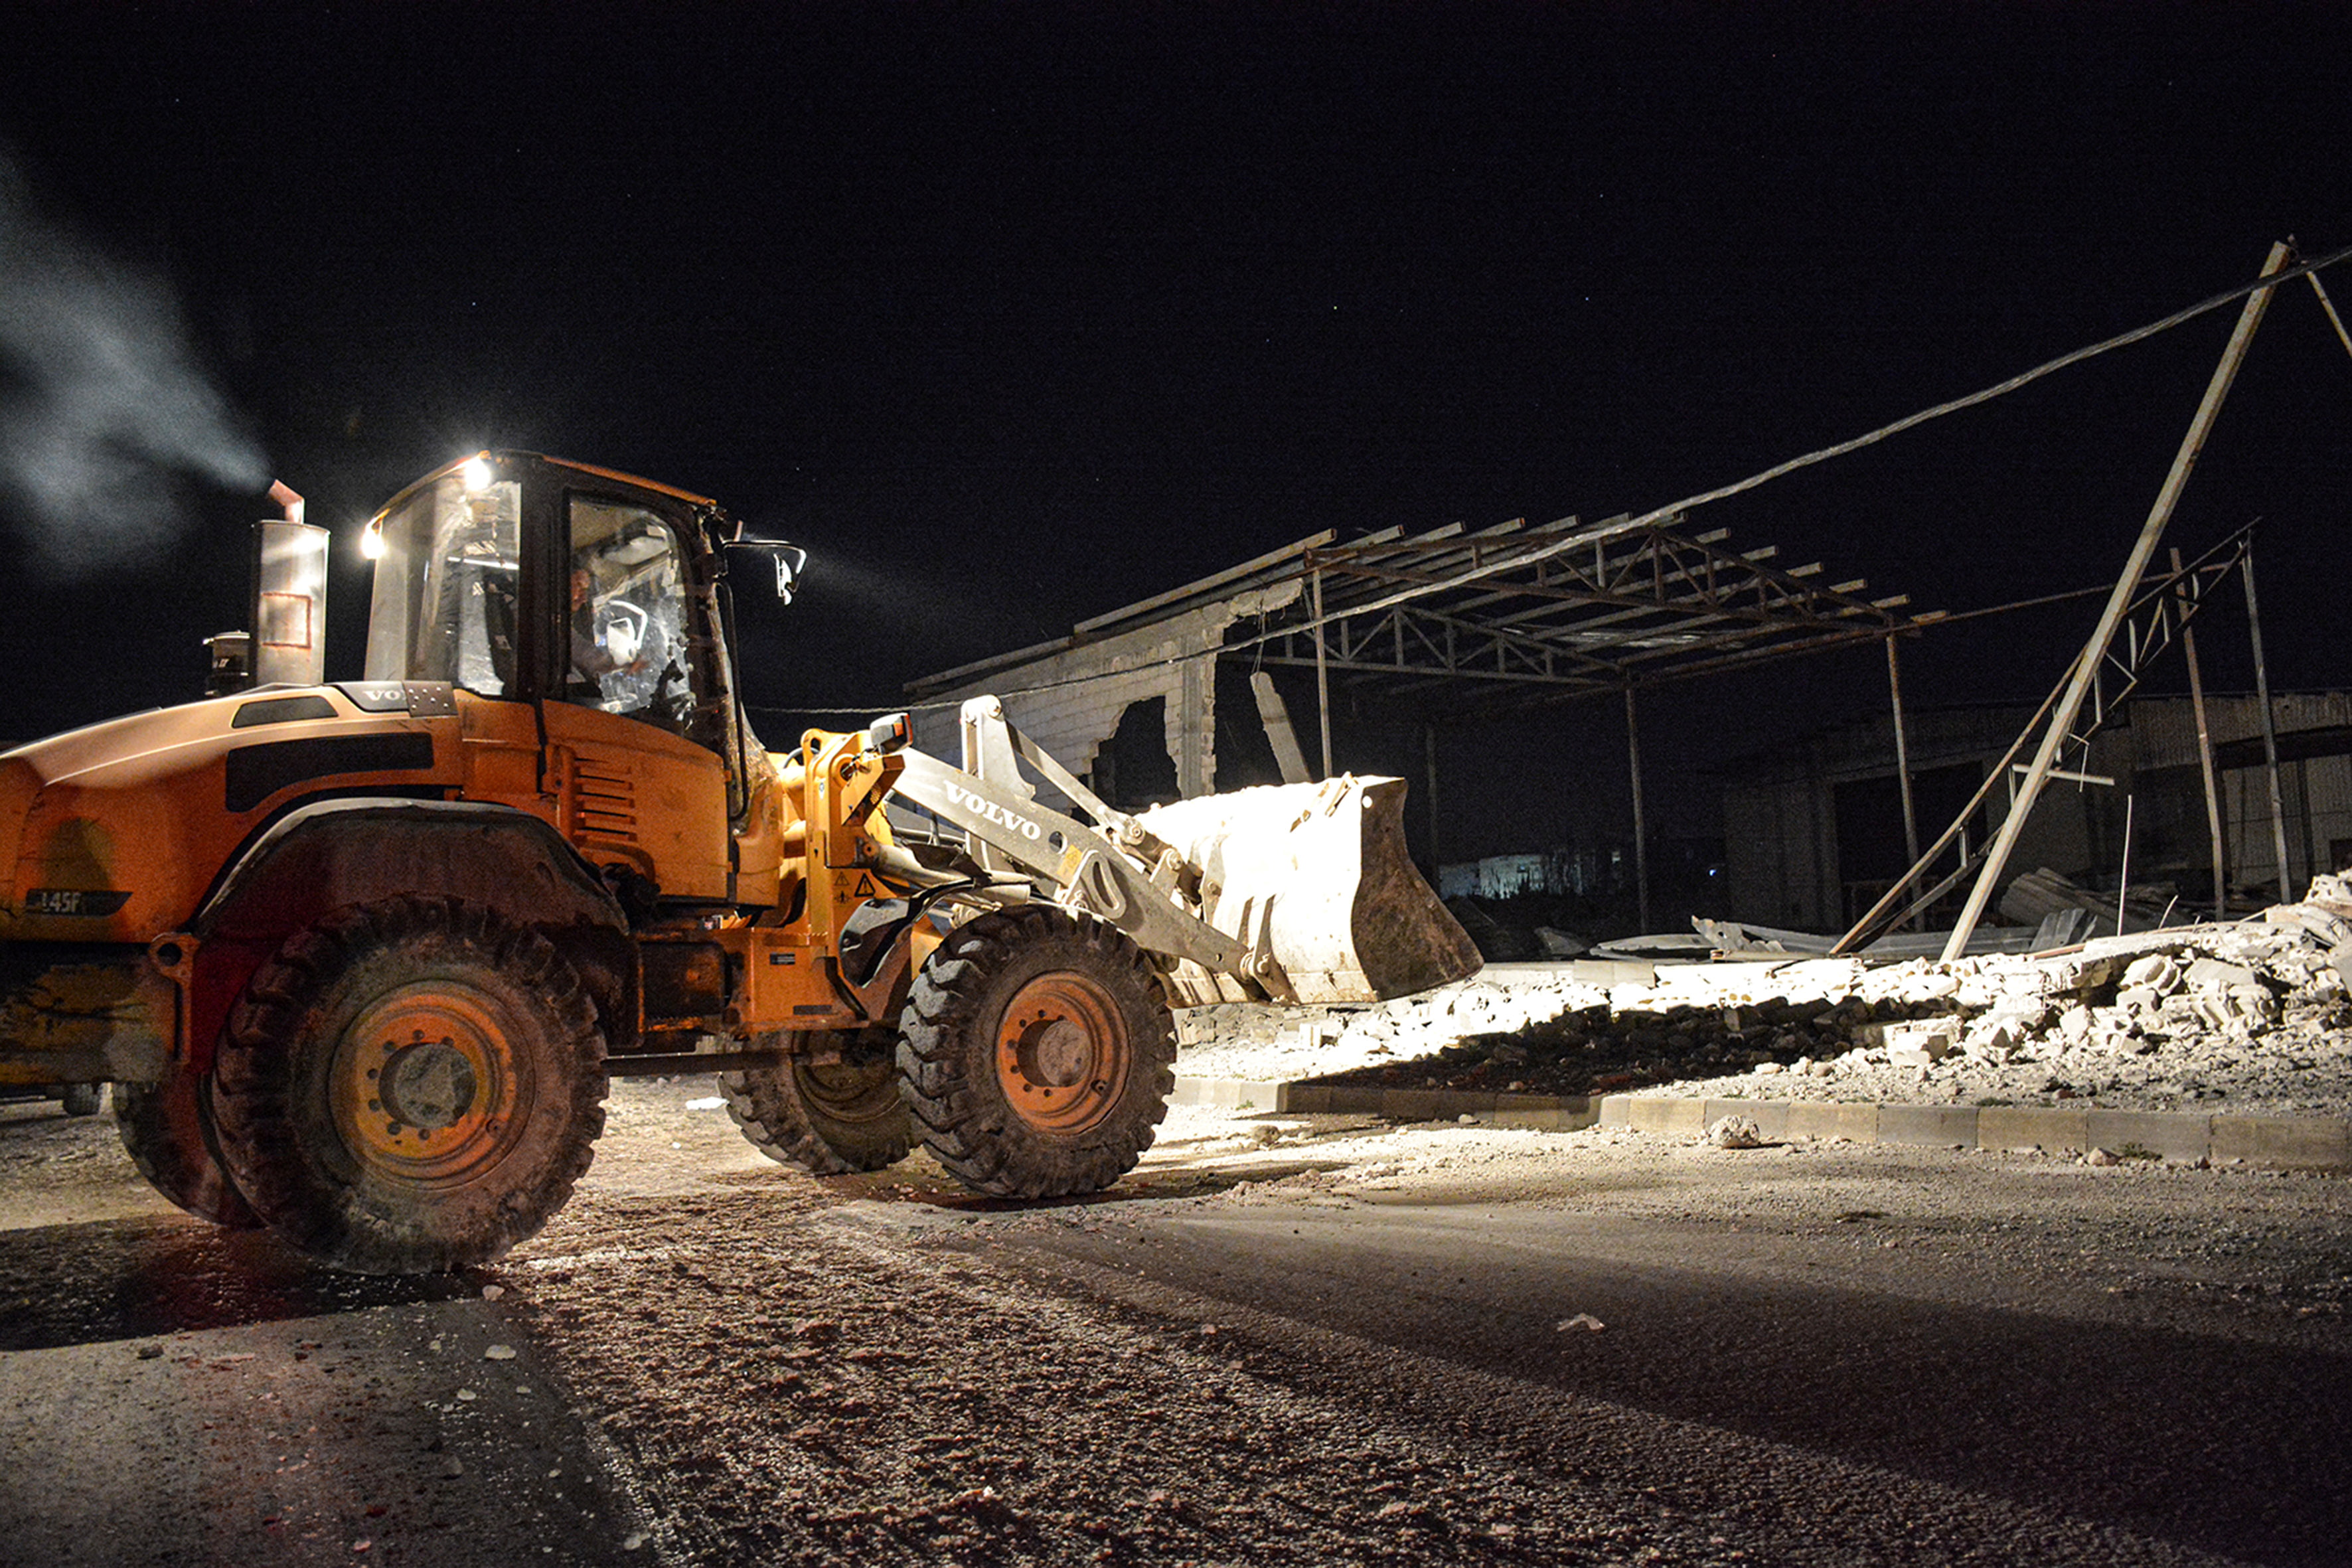 A man operates a front loader at a site after pre-dawn raids on the Mediterranean port region of Latakia